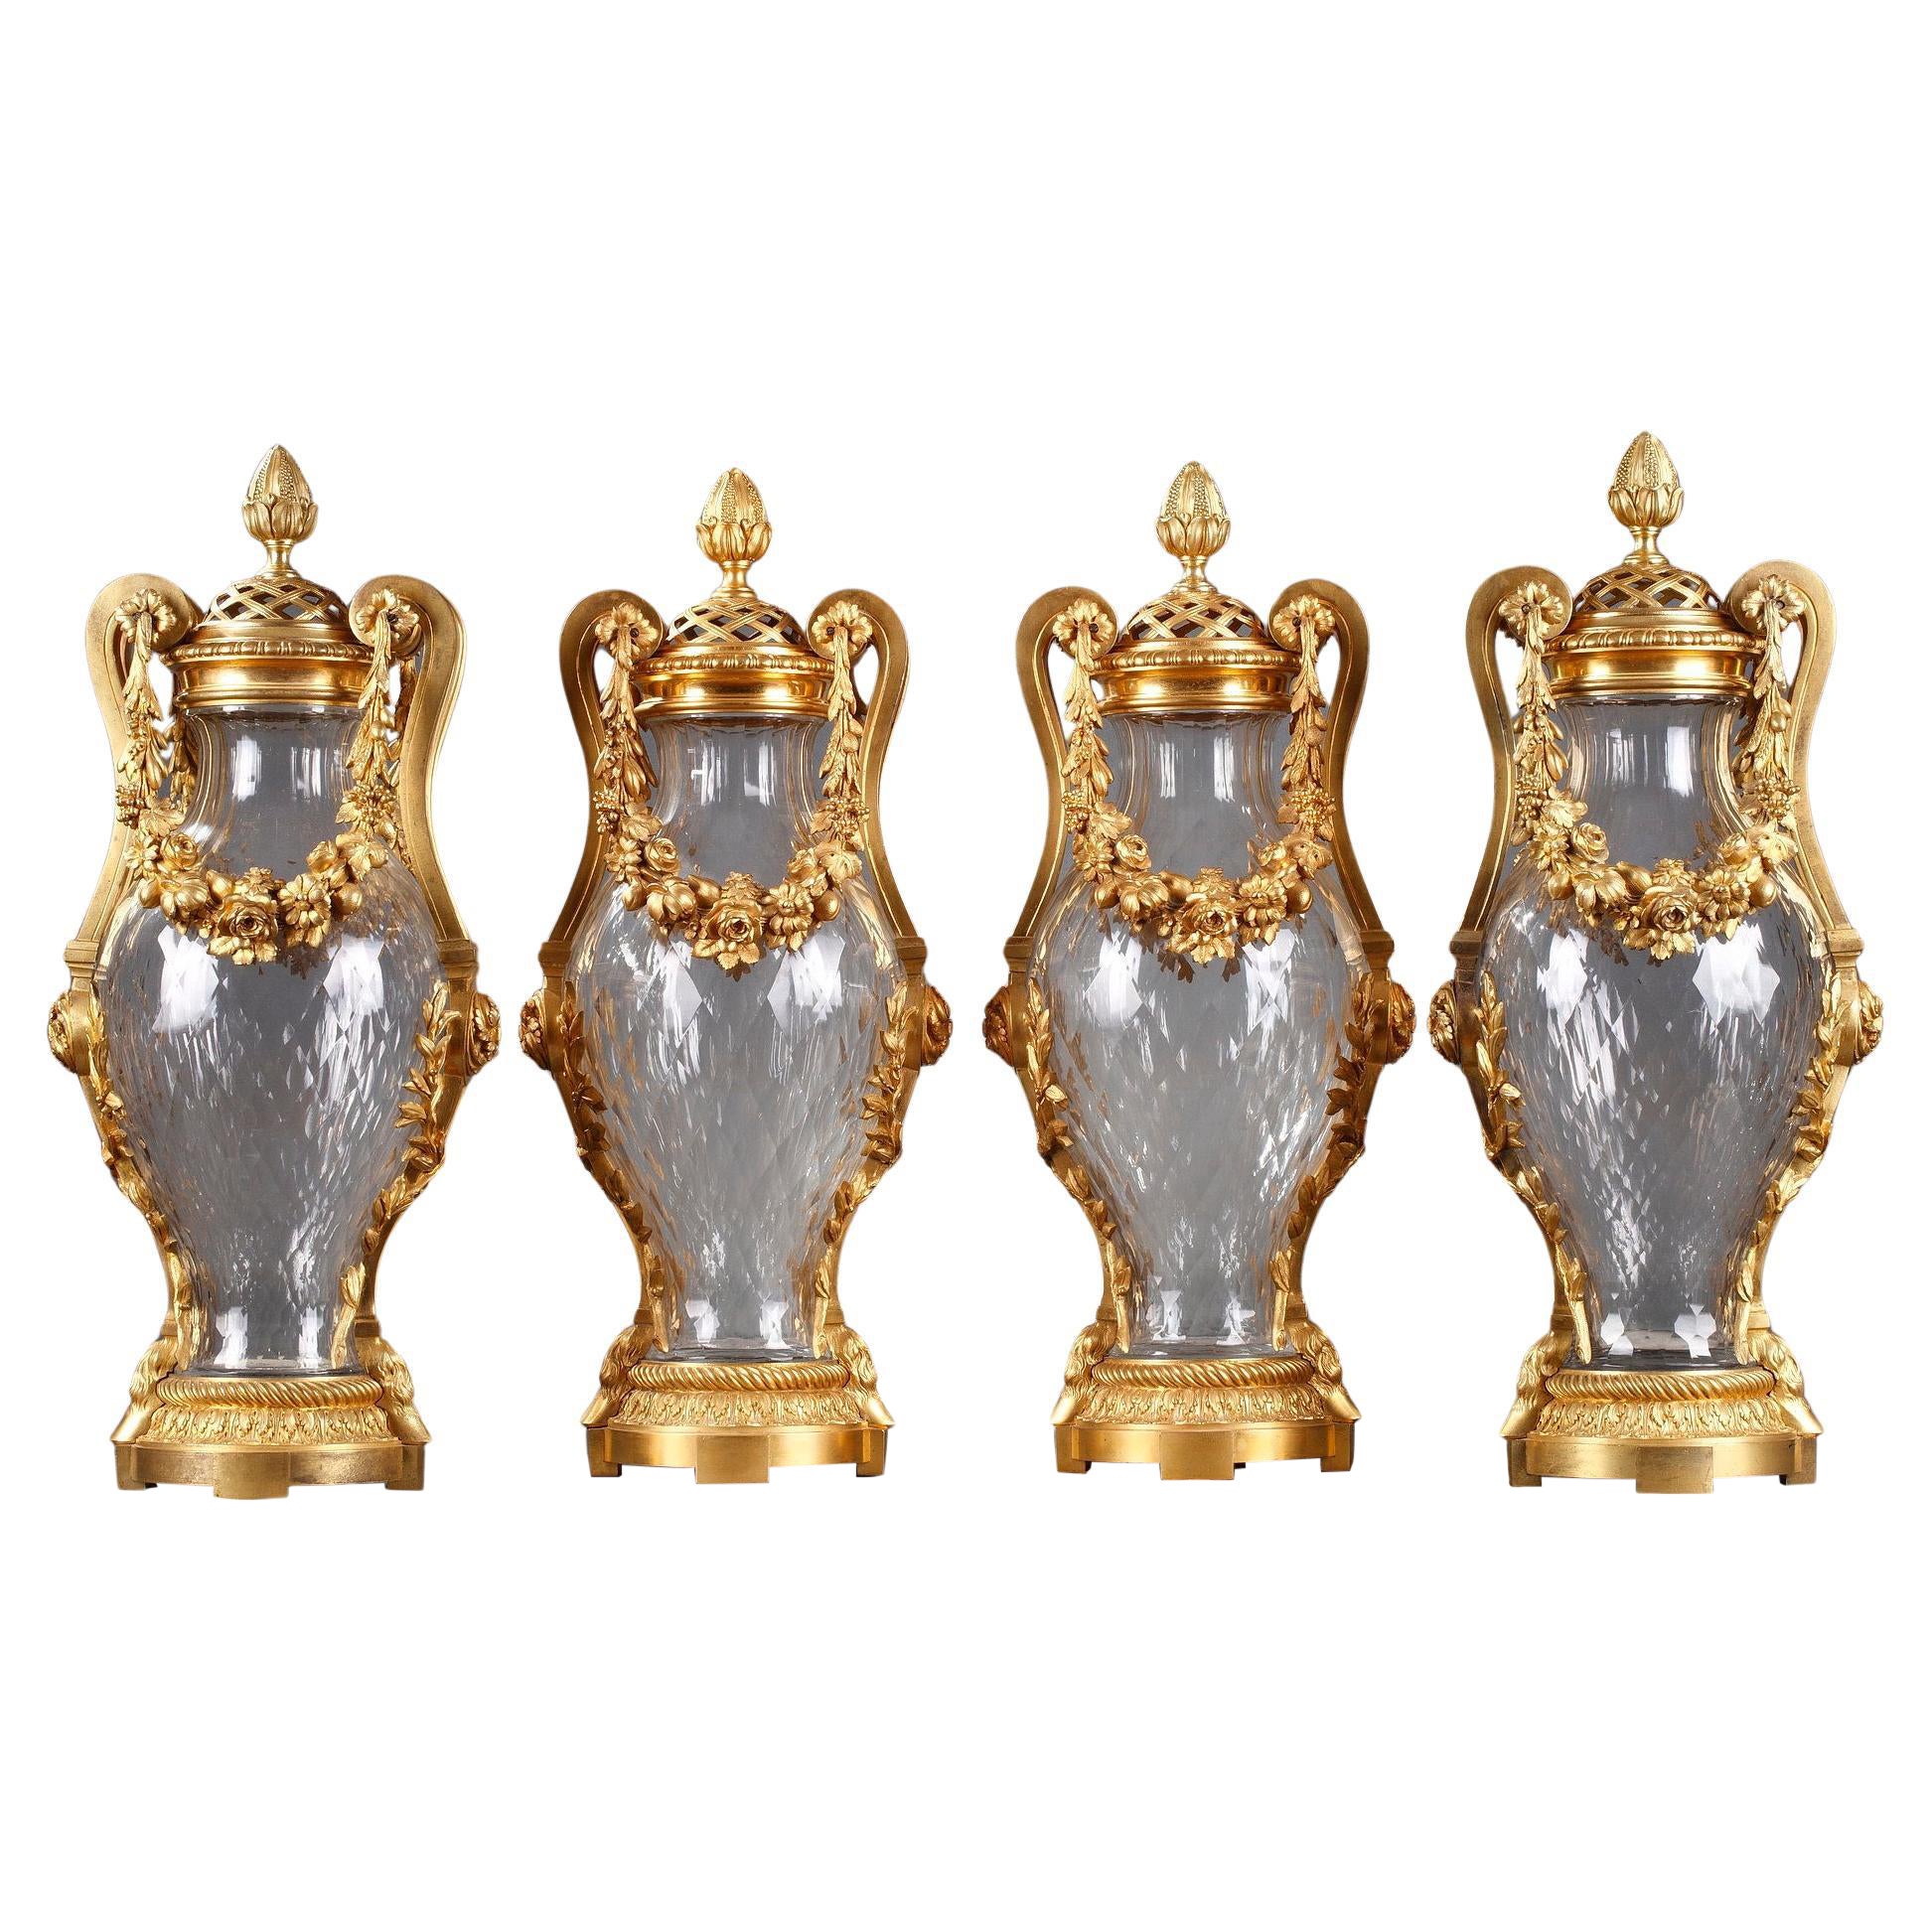 Four Baccarat Crystal Vases, by H. Vian ; H.Dasson & Baccarat, France, C. 1880 For Sale